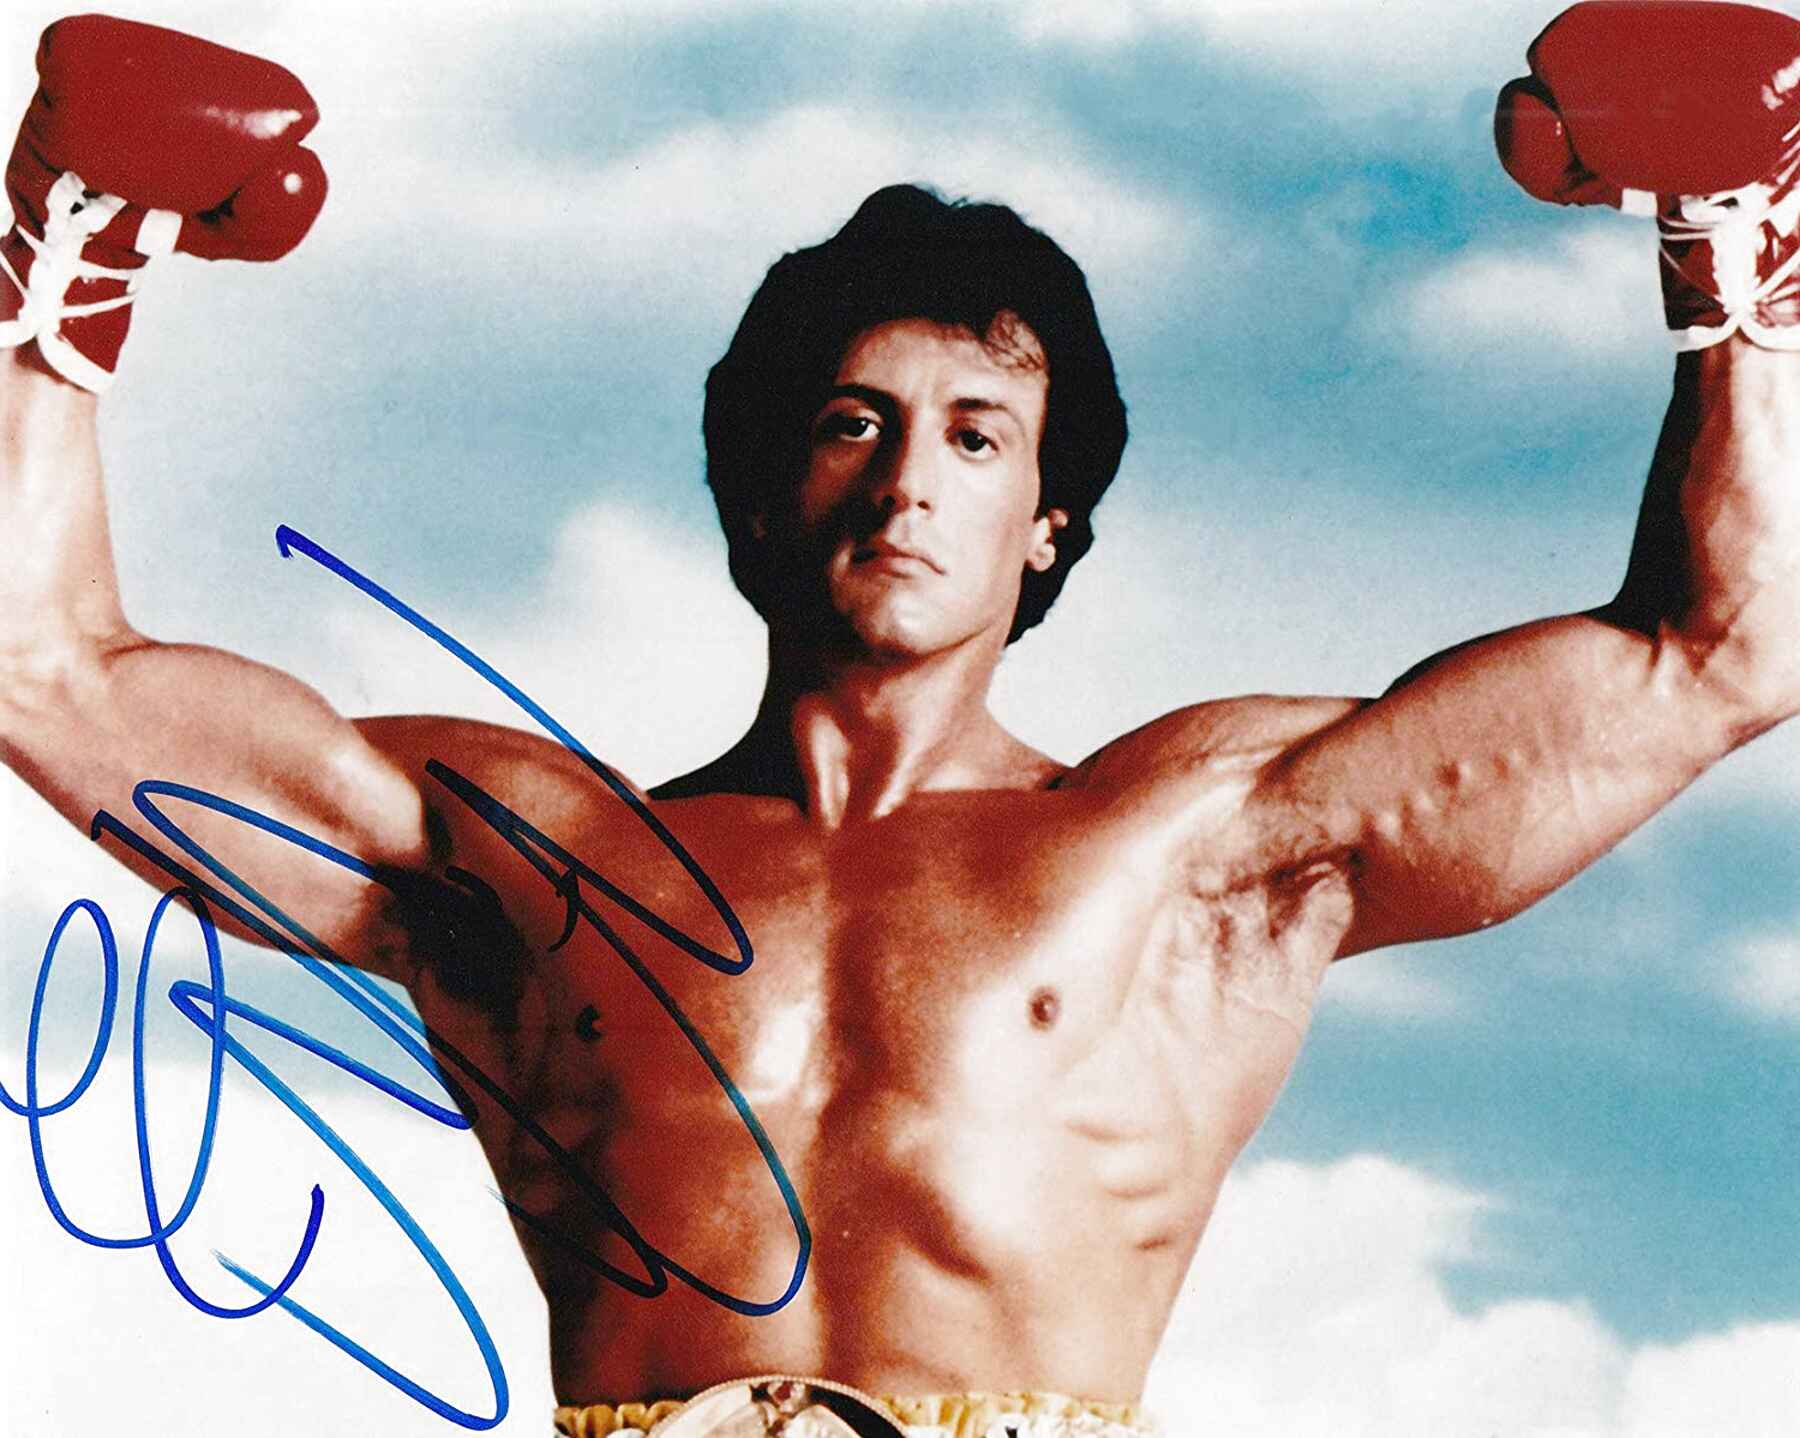 CERT PRINTED AUTOGRAPH LIMITED EDITION STALLONE DOLPH LUNDGREN ROCKY SIGNED PHOTOGRAPH 